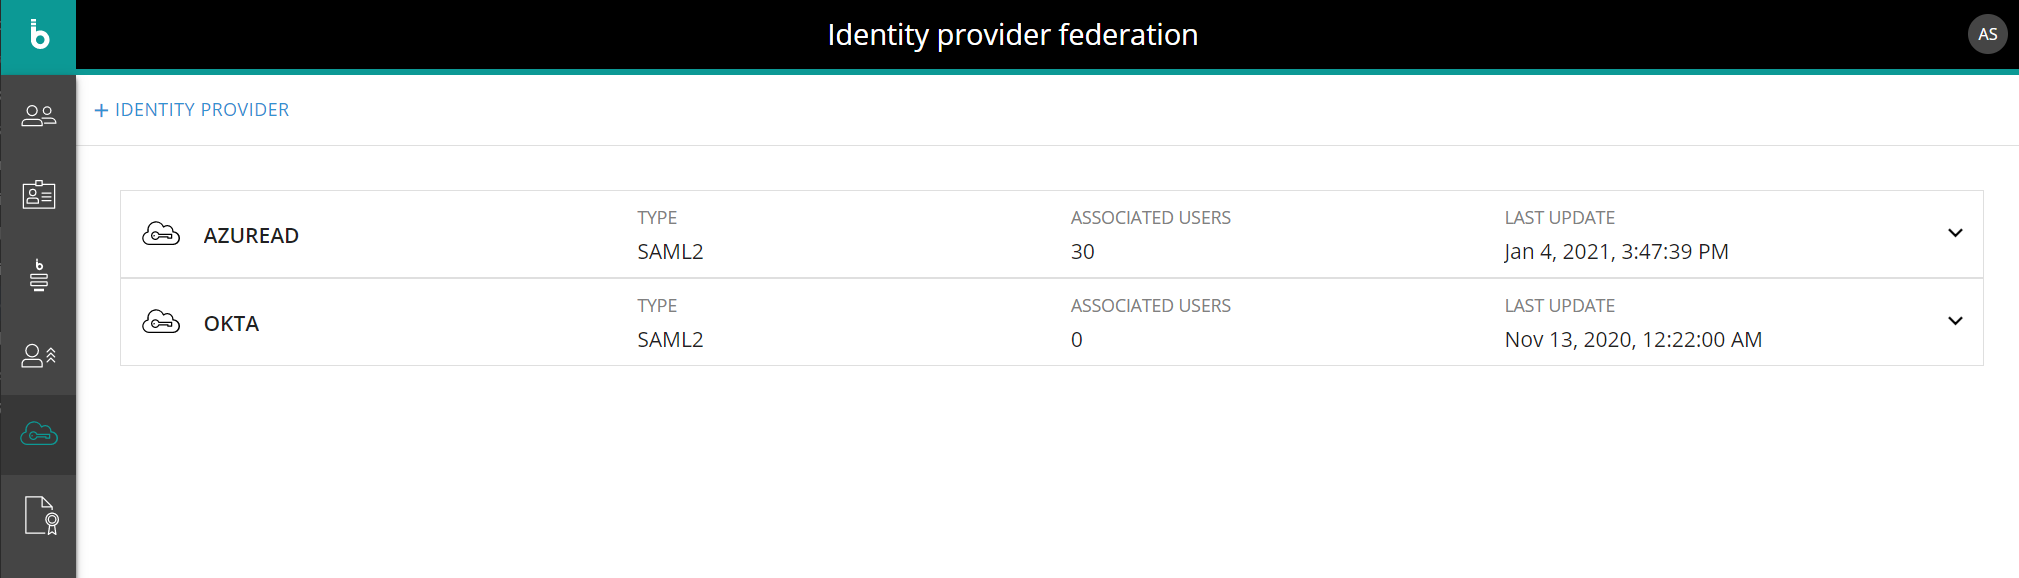 Identity Provider Federation home page